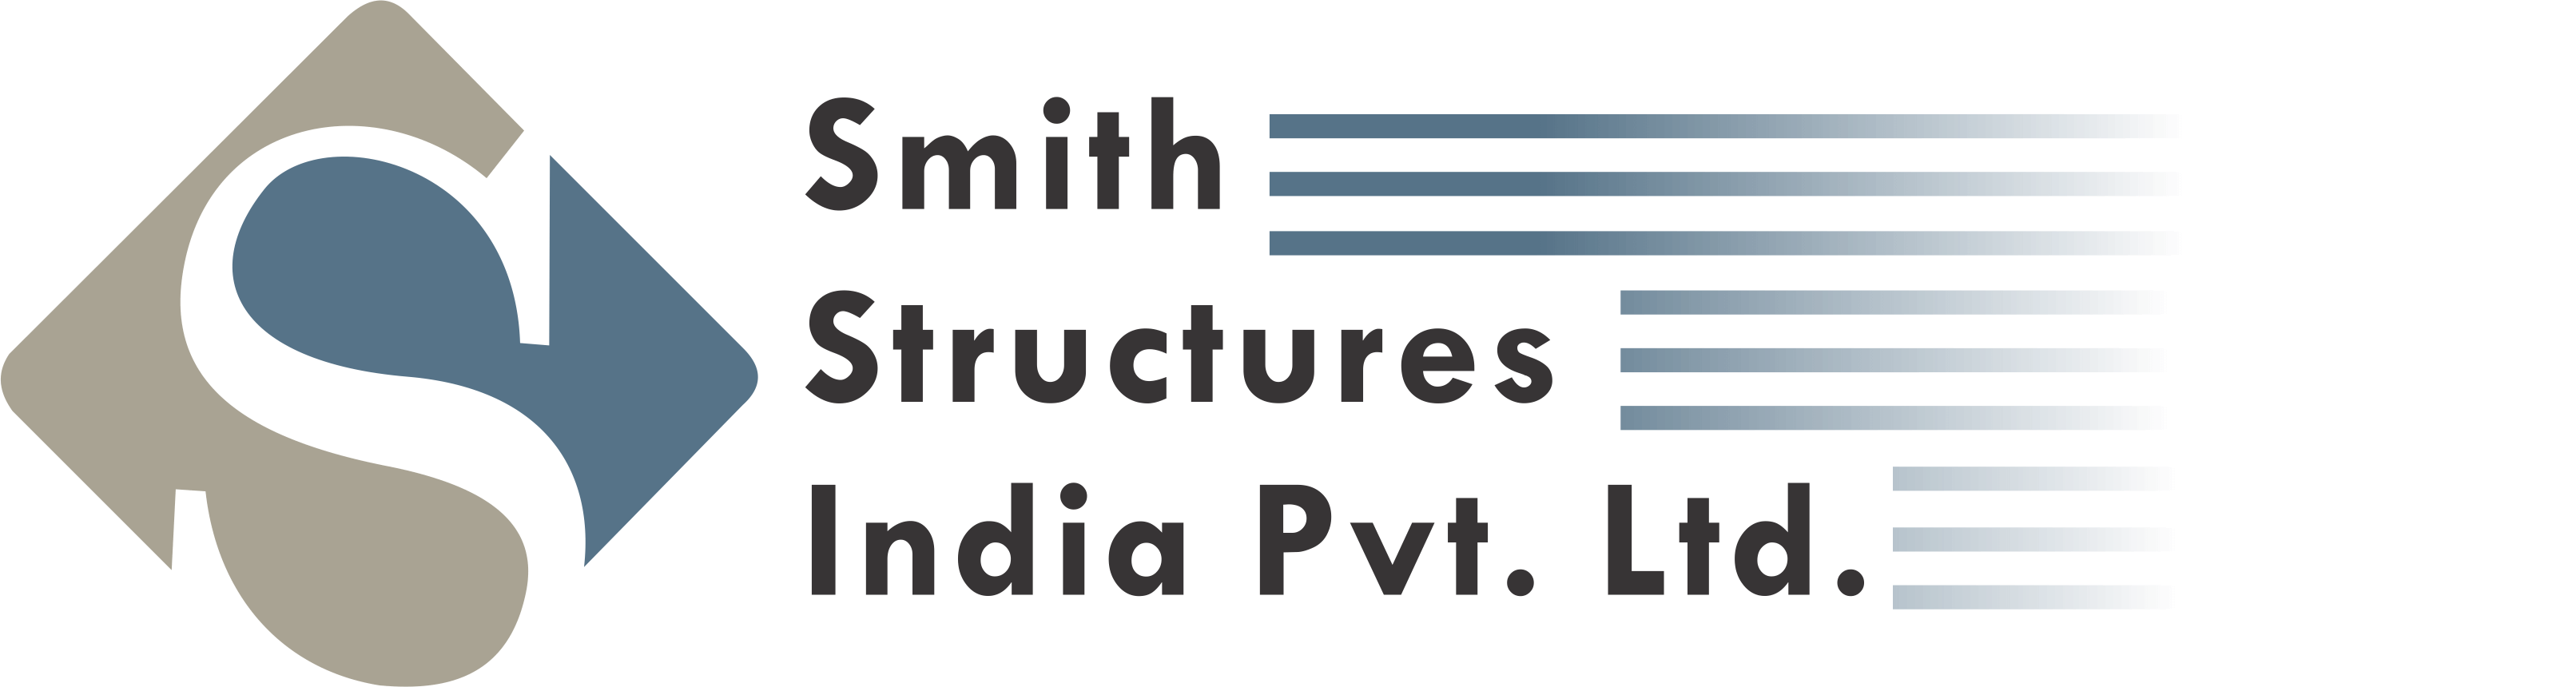 Company Profile | Smith Structures